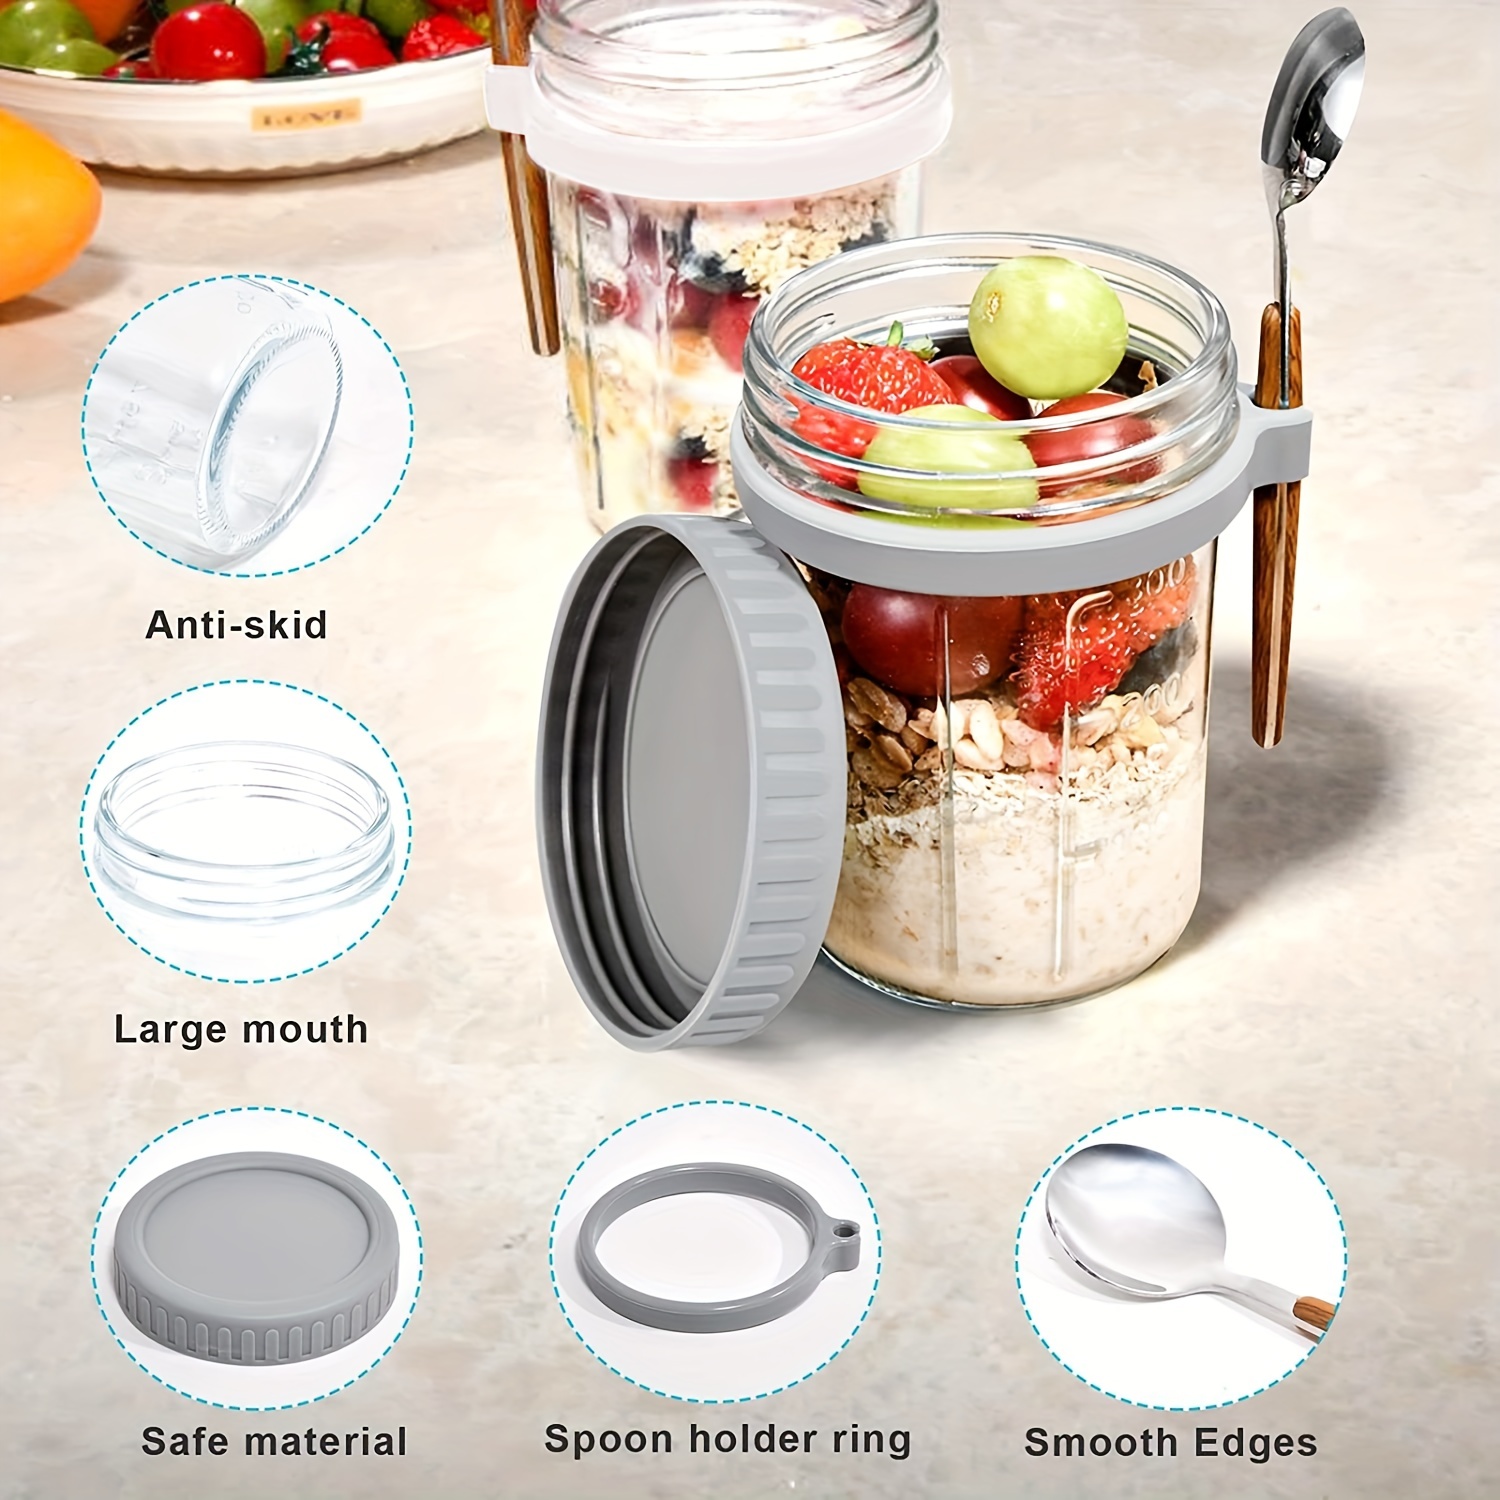 4 Pack Overnight Oats Containers with Lids and Spoons 16 Oz Glass